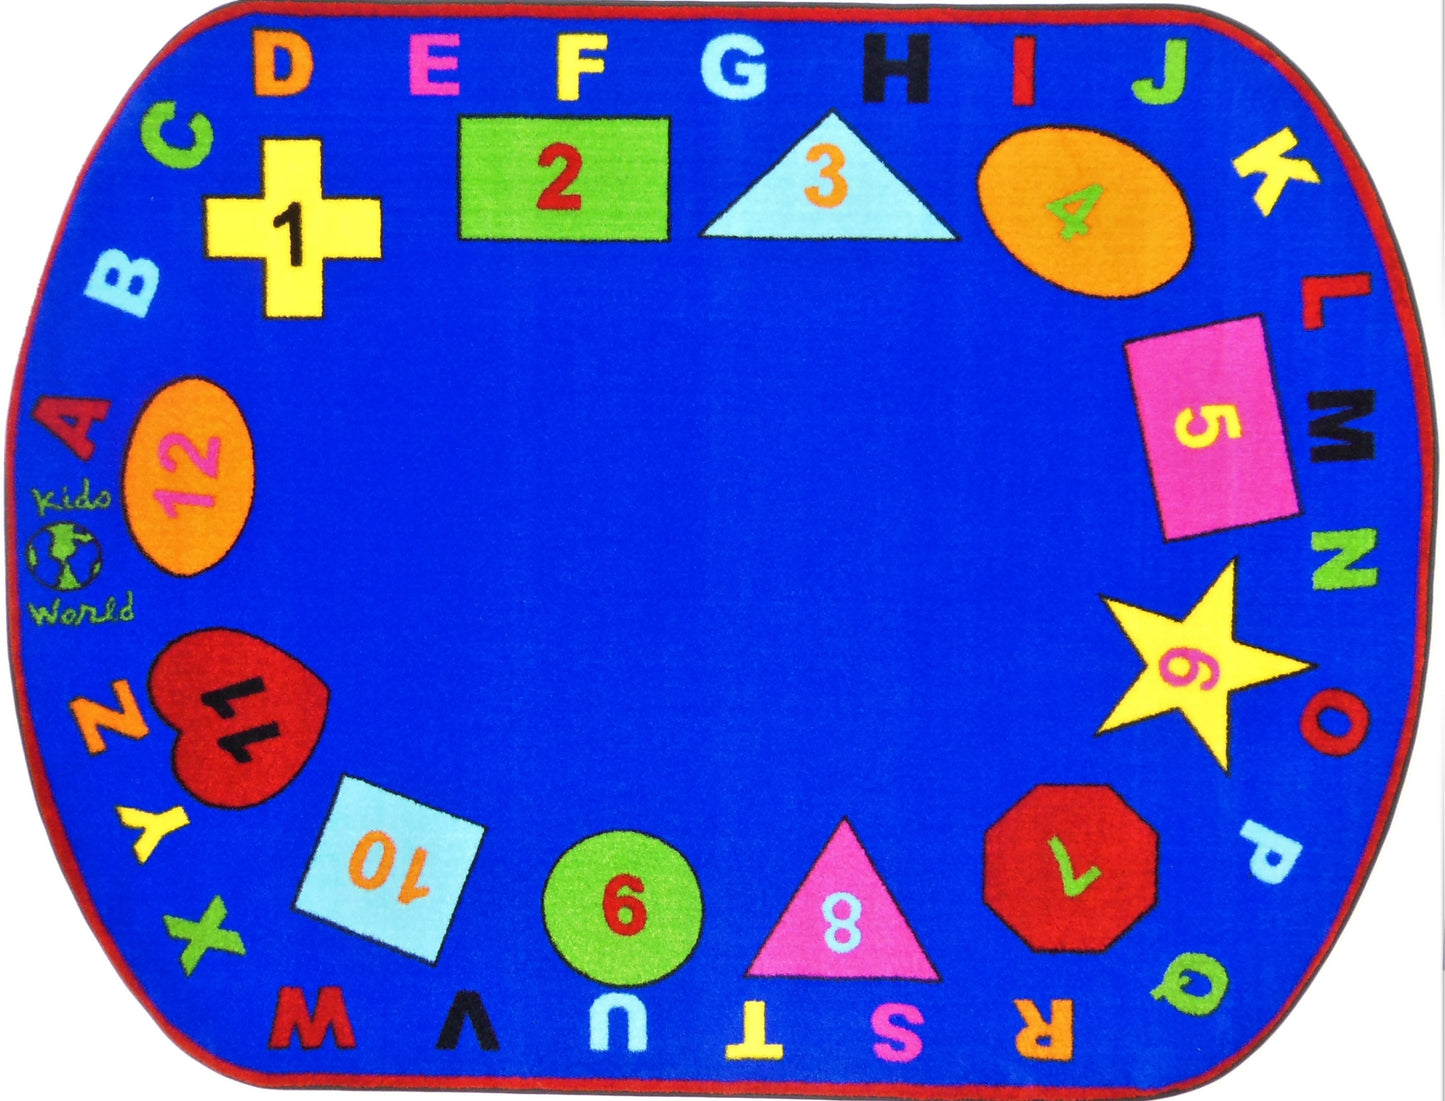 Star of Shapes Educational Classroom Area Rug